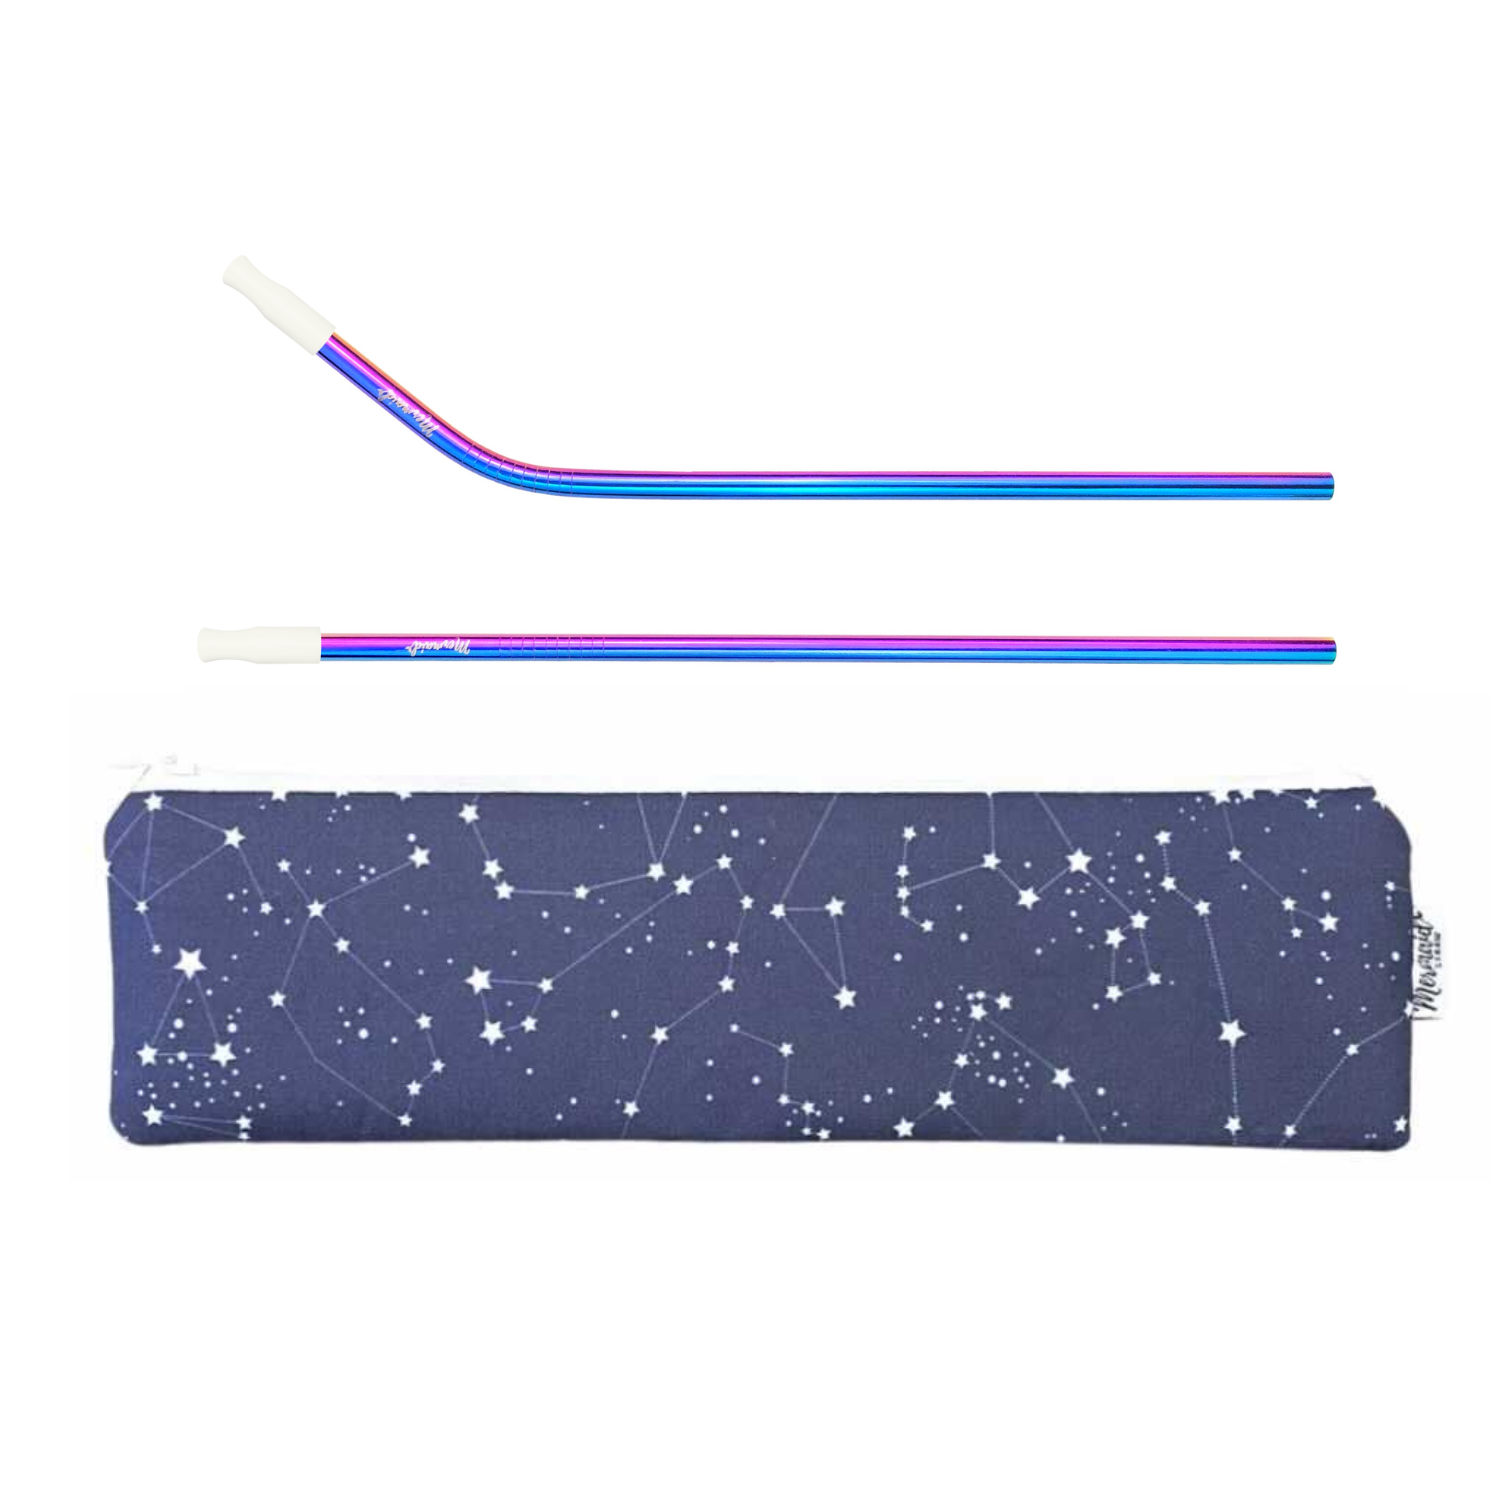 Mermaid Straw Constellations Zipper Pouch with Mermaid Stainless Steel Straws and 6mm white silicone tips